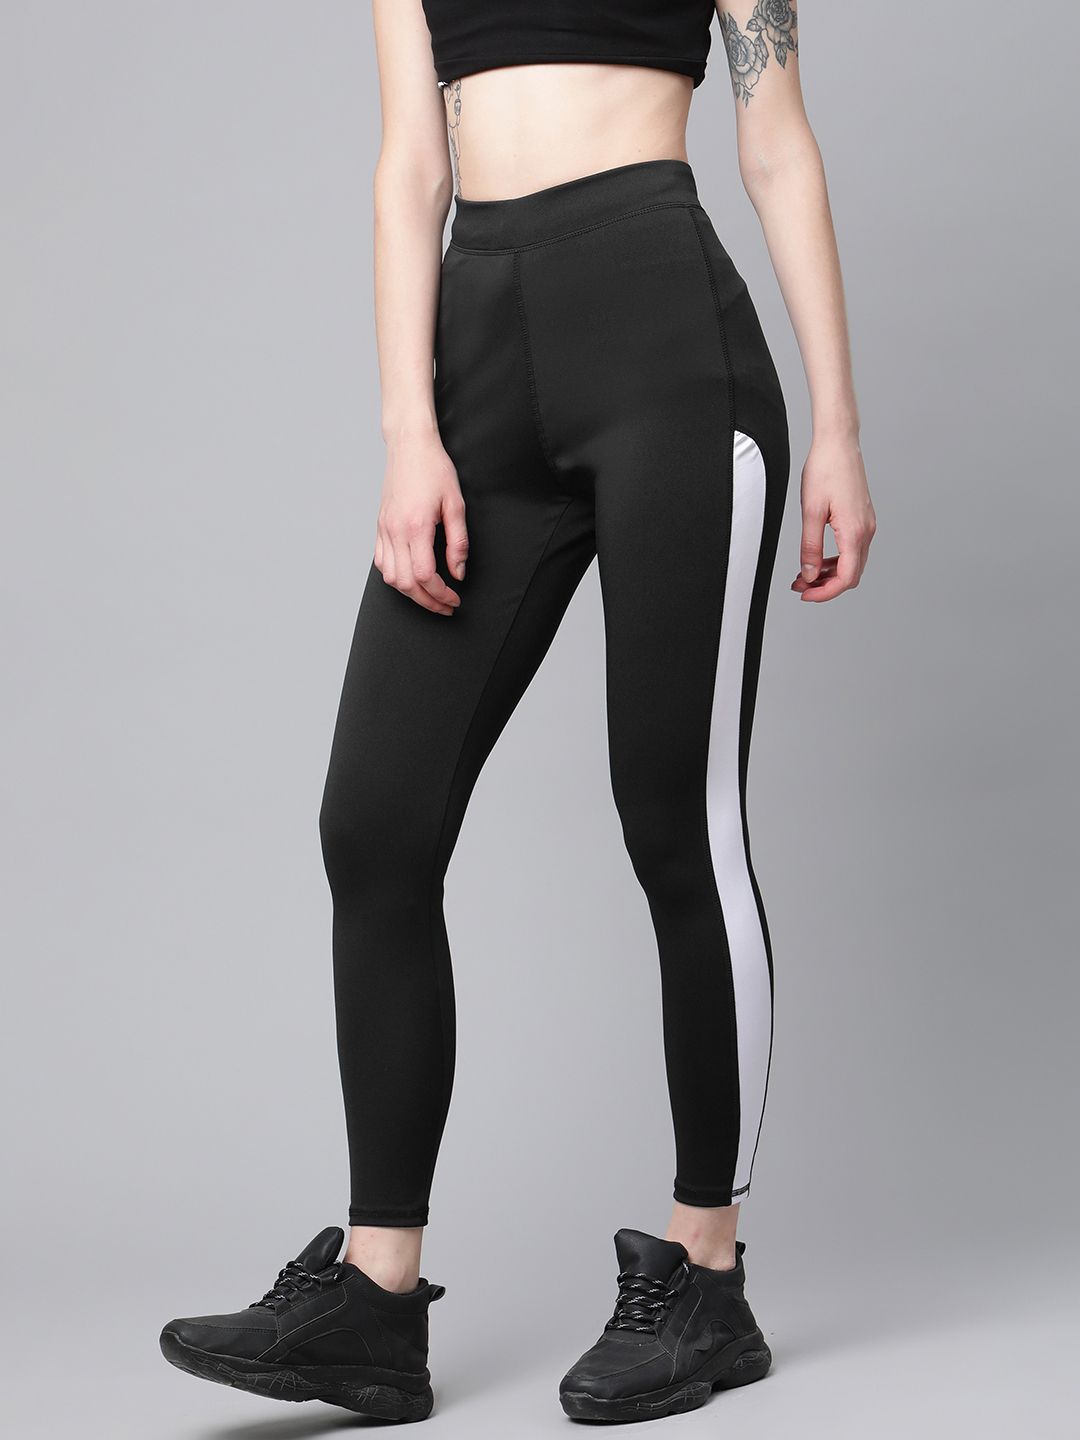 Blinkin Women Black Solid High-Rise Tights with Side Taping Price in India